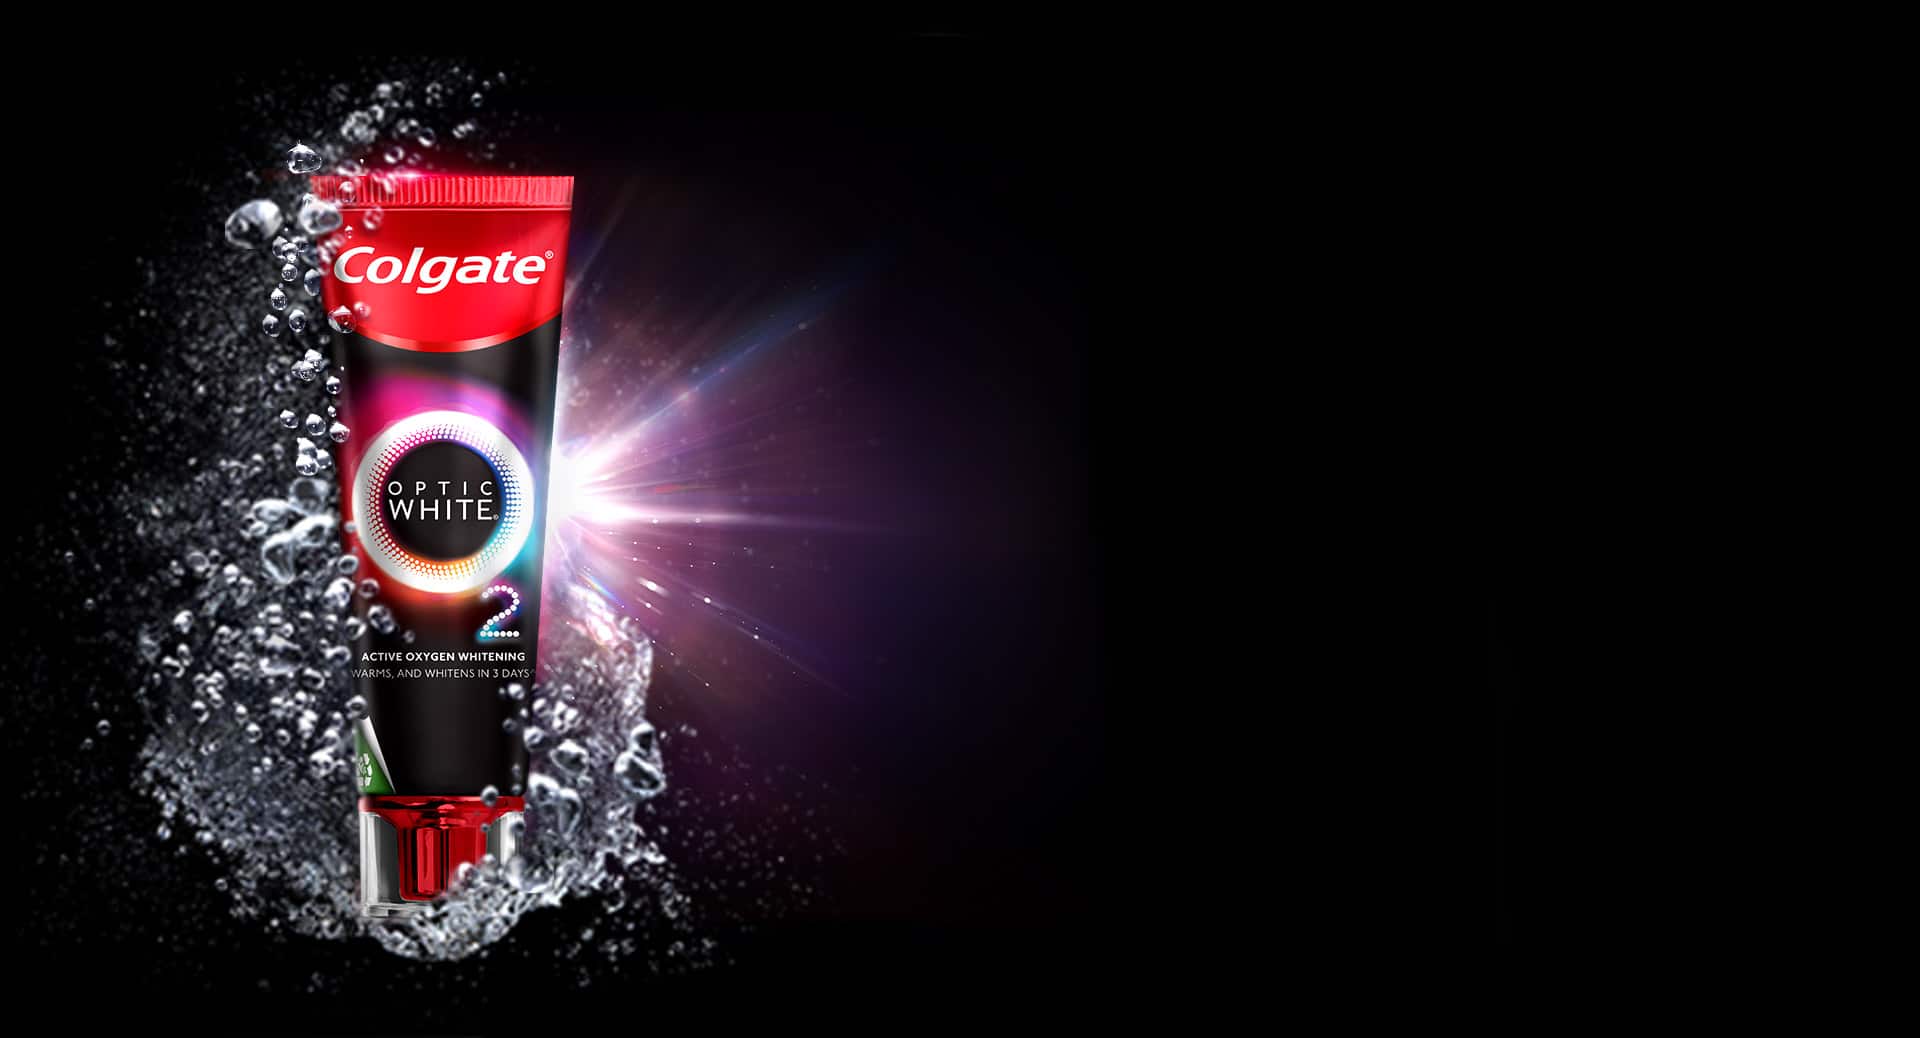 Solo shot of Colgate's Optic White O2 Toothpaste; image used for introducing Colgate's best teeth whitening product